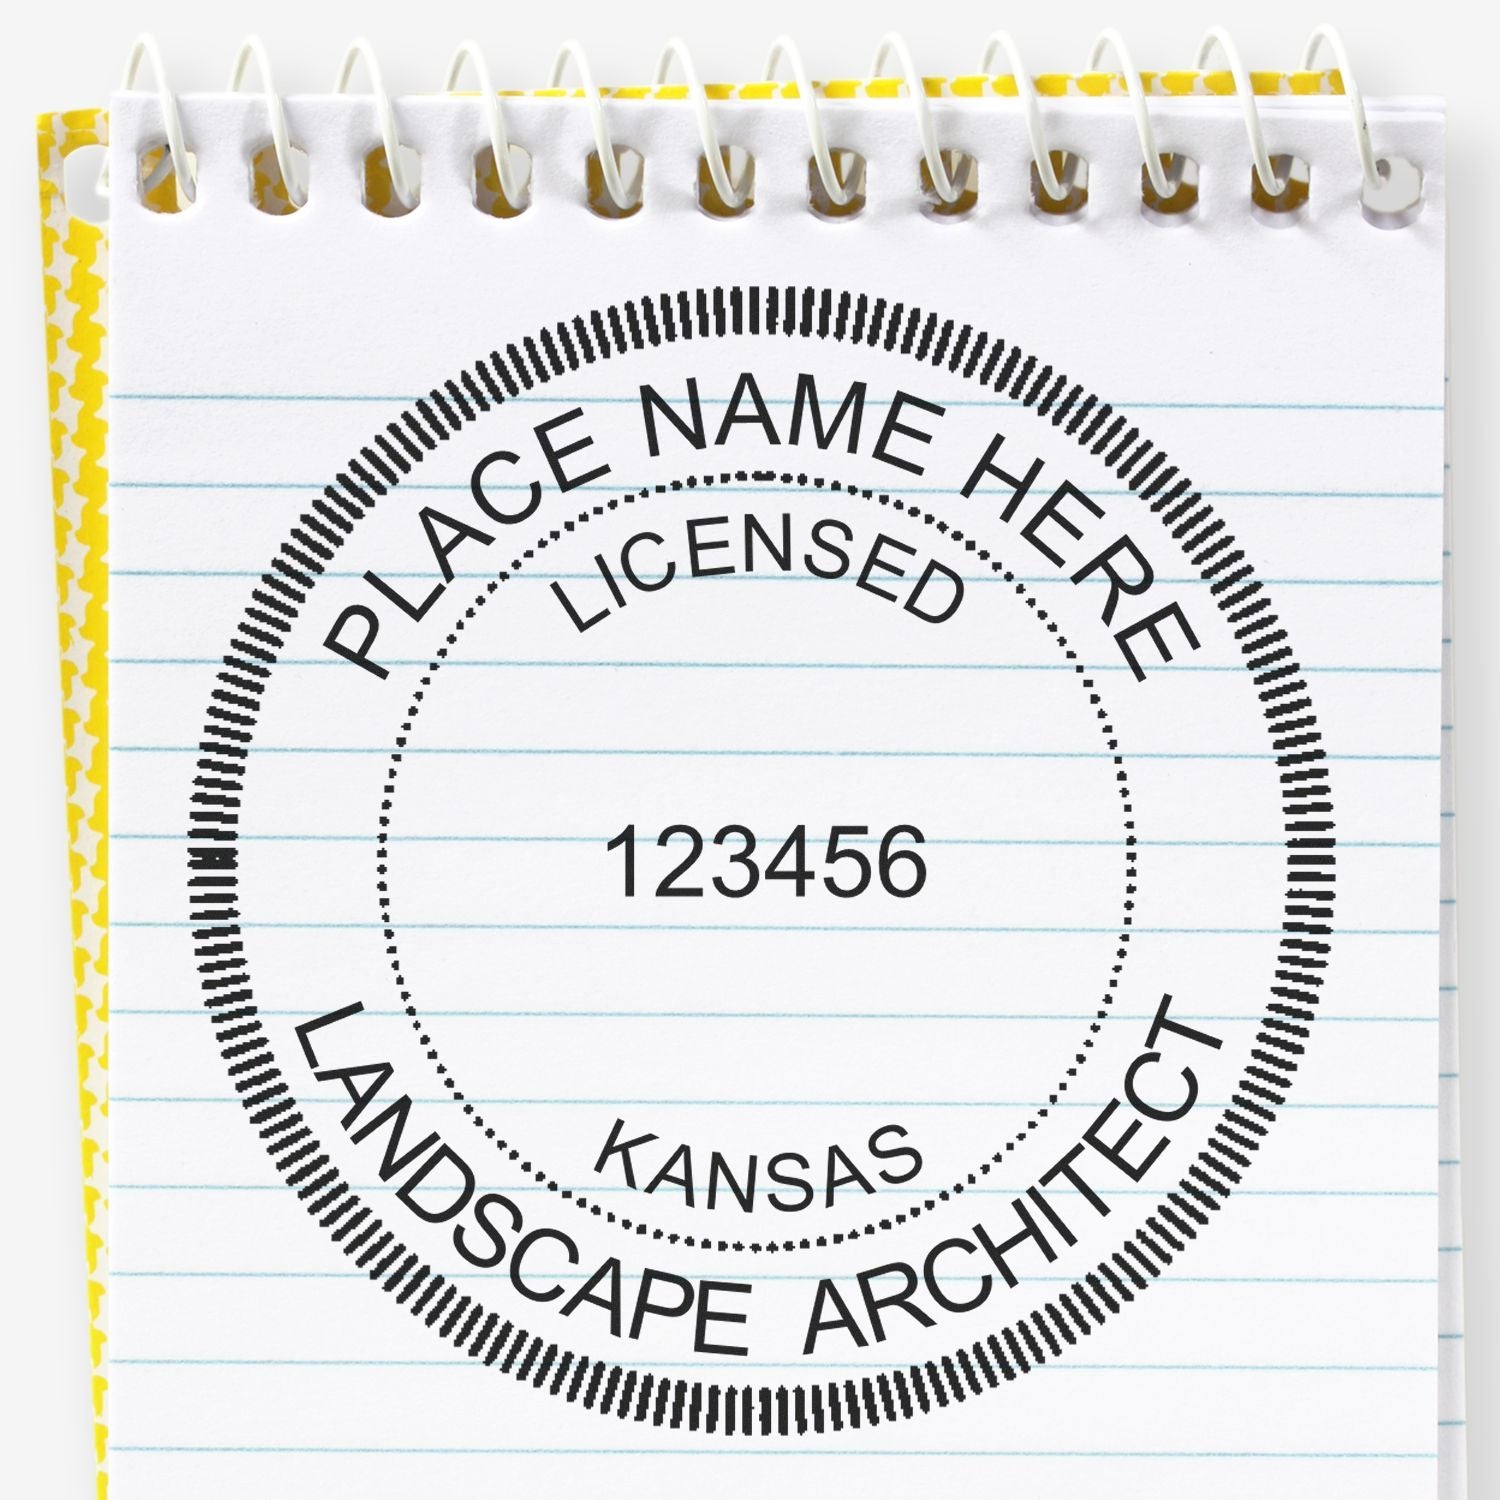 The main image for the Digital Kansas Landscape Architect Stamp depicting a sample of the imprint and electronic files